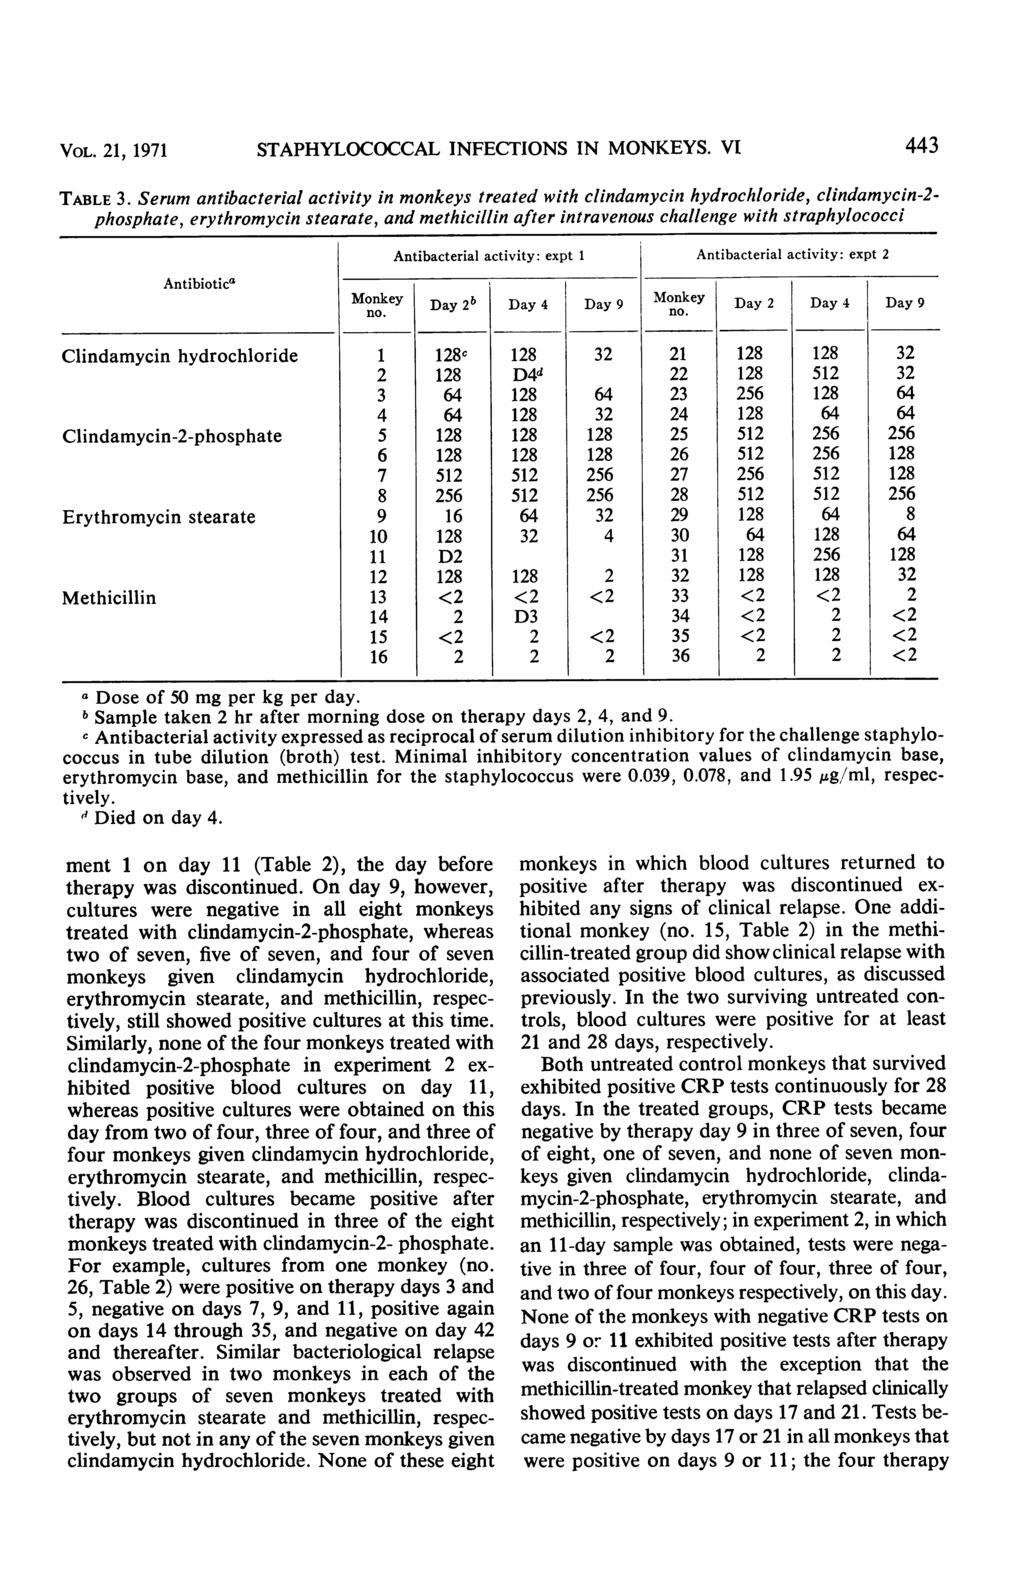 VOL. 21, 1971 STAPHYLOCOCCAL INFECTIONS IN MONKEYS. VI TABLE 3.